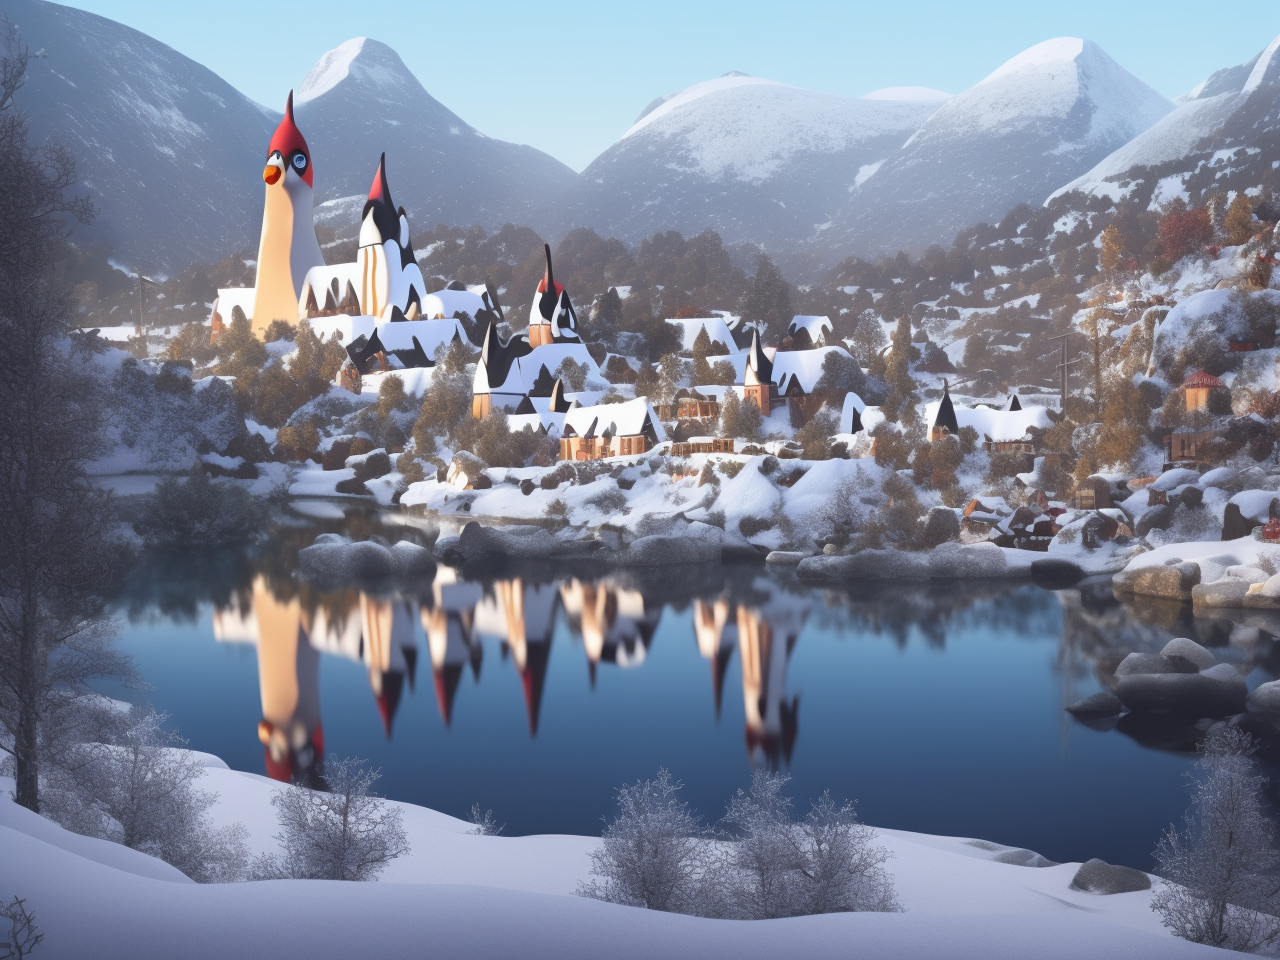 a small village is surrounded by a lake and mountains in the background, with snow on the ground and trees in the foreground, notable church towers that somewhat resemble penguins